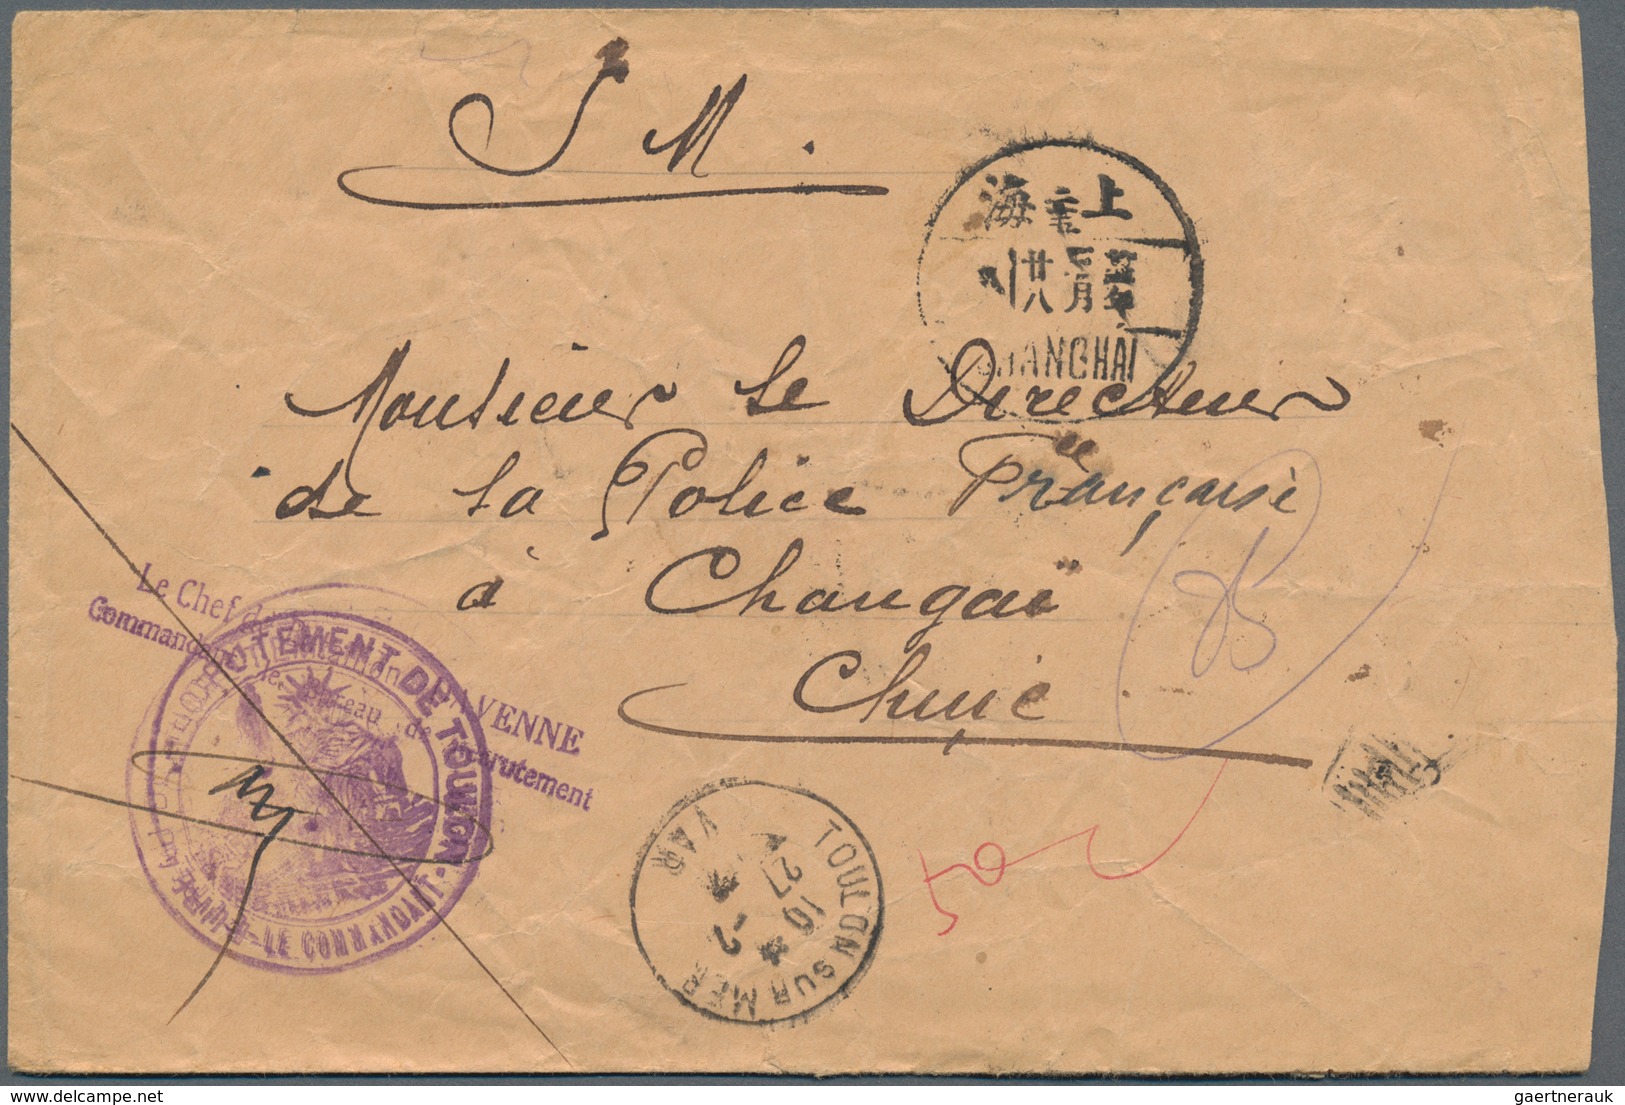 China - Portomarken: 1933/40, covers (3) resp. card (1) charged postage due with orange dues affixed